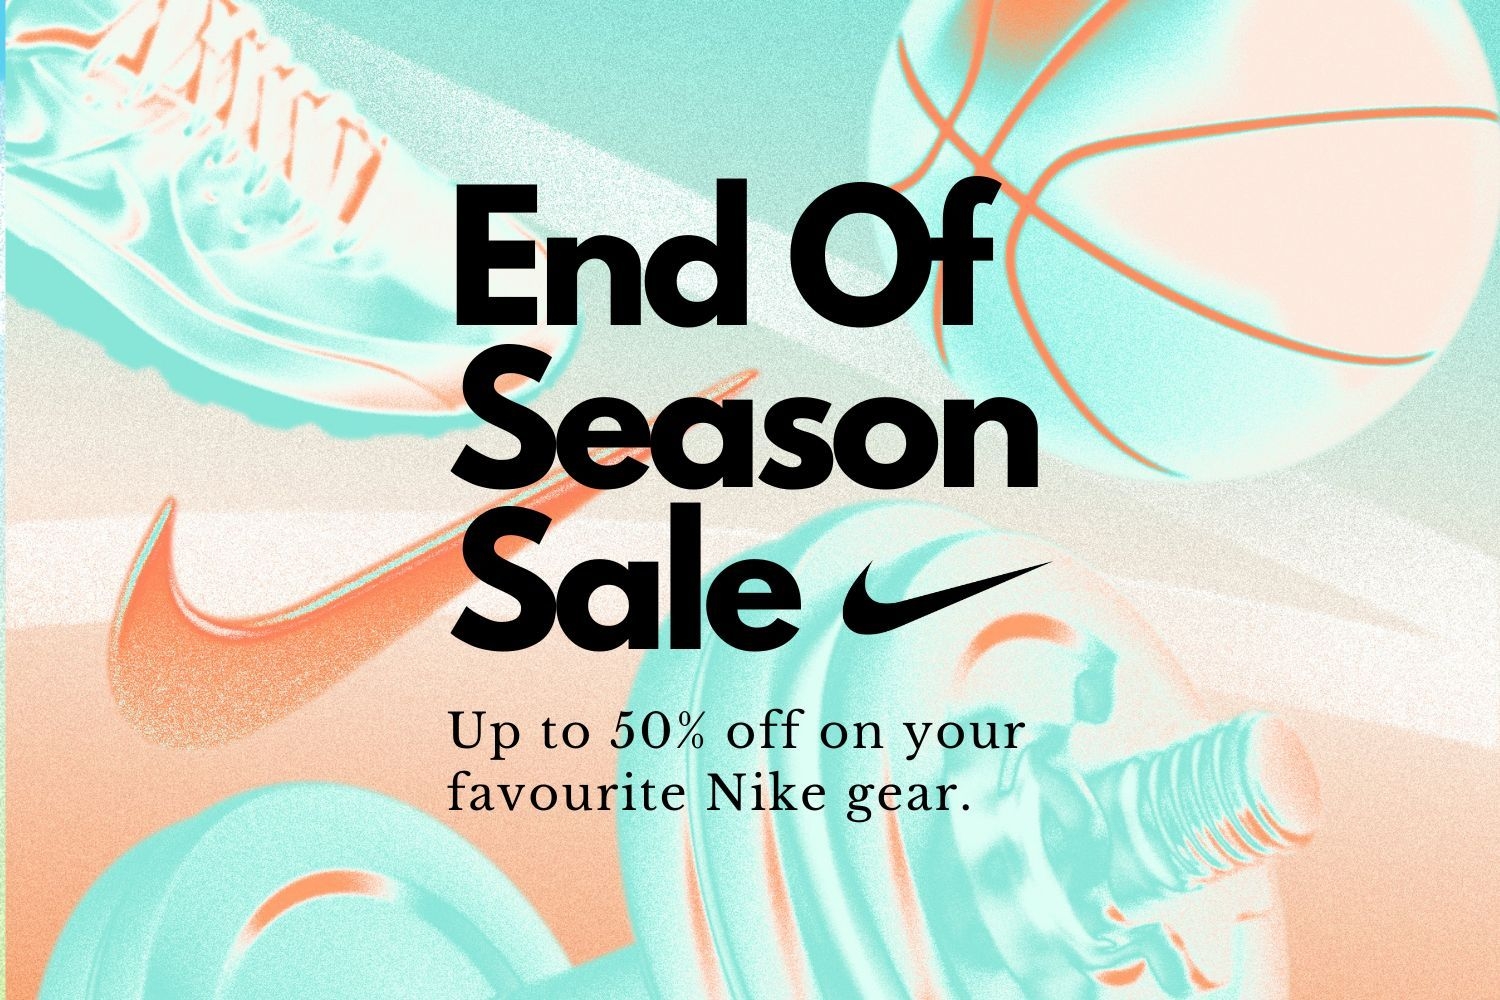 Nike offers up to 50% off in the End of Season Sale